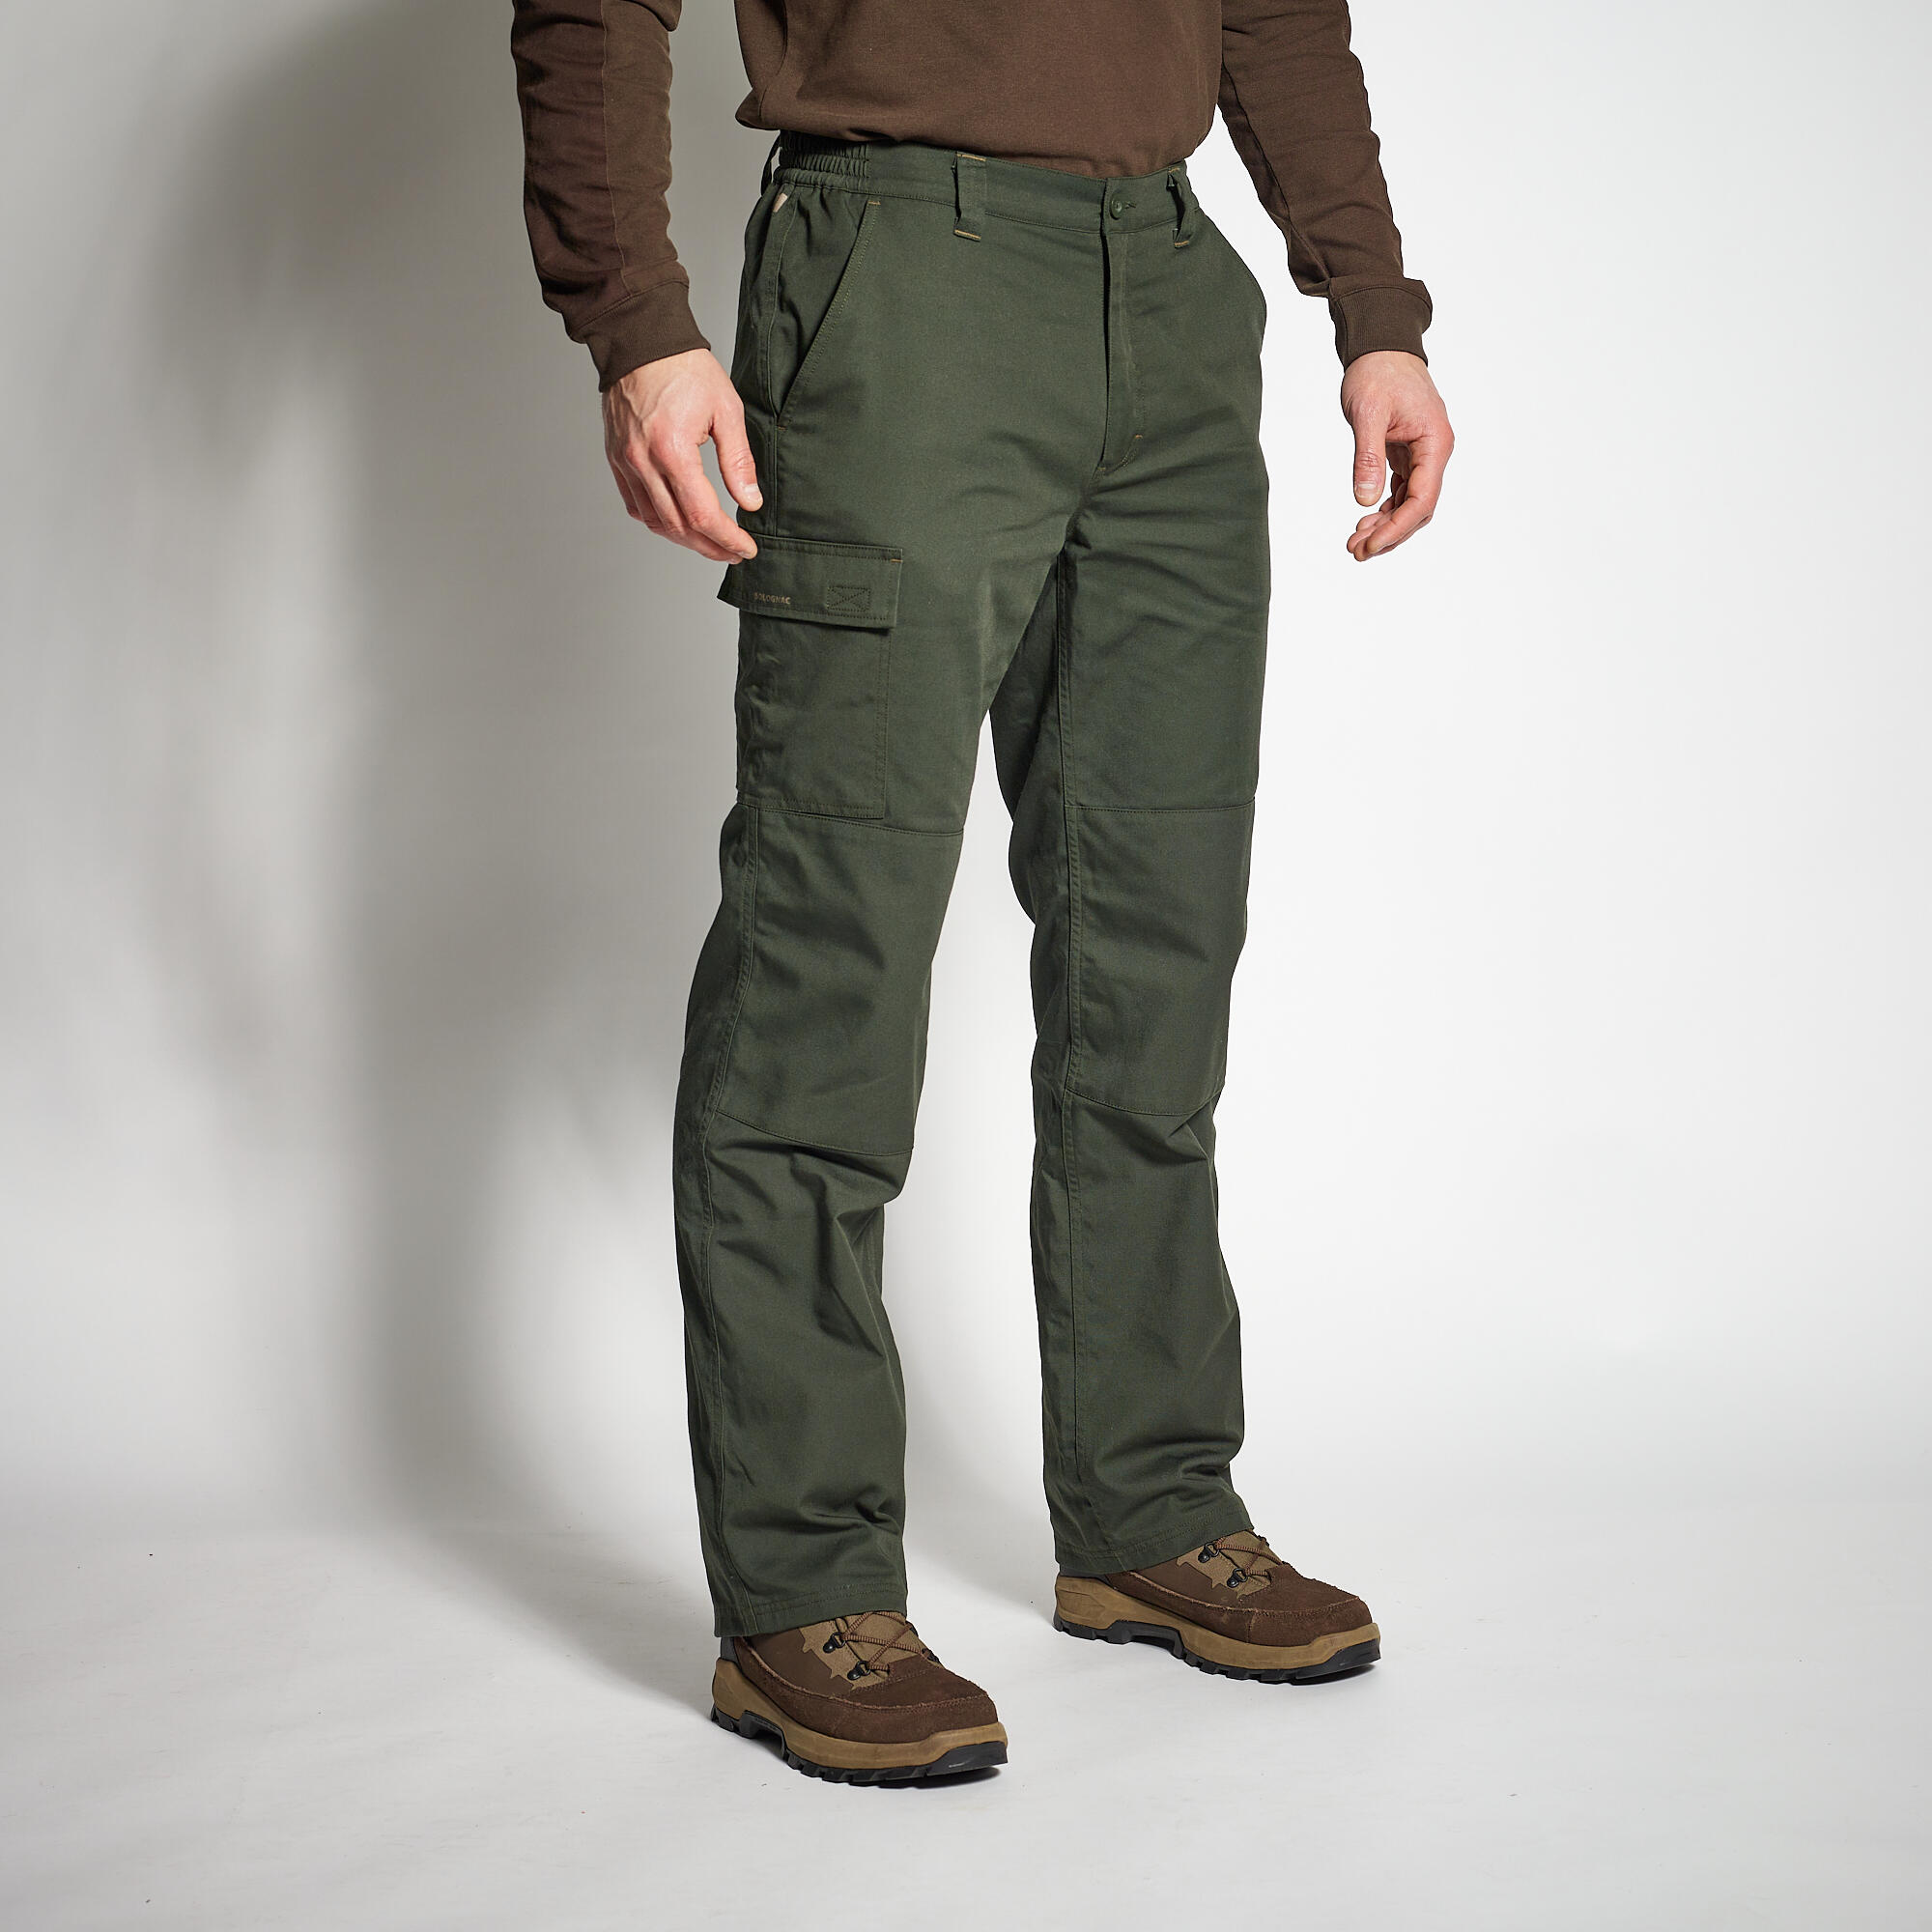 WARM HUNTING TROUSERS 100 - GREEN 1/8